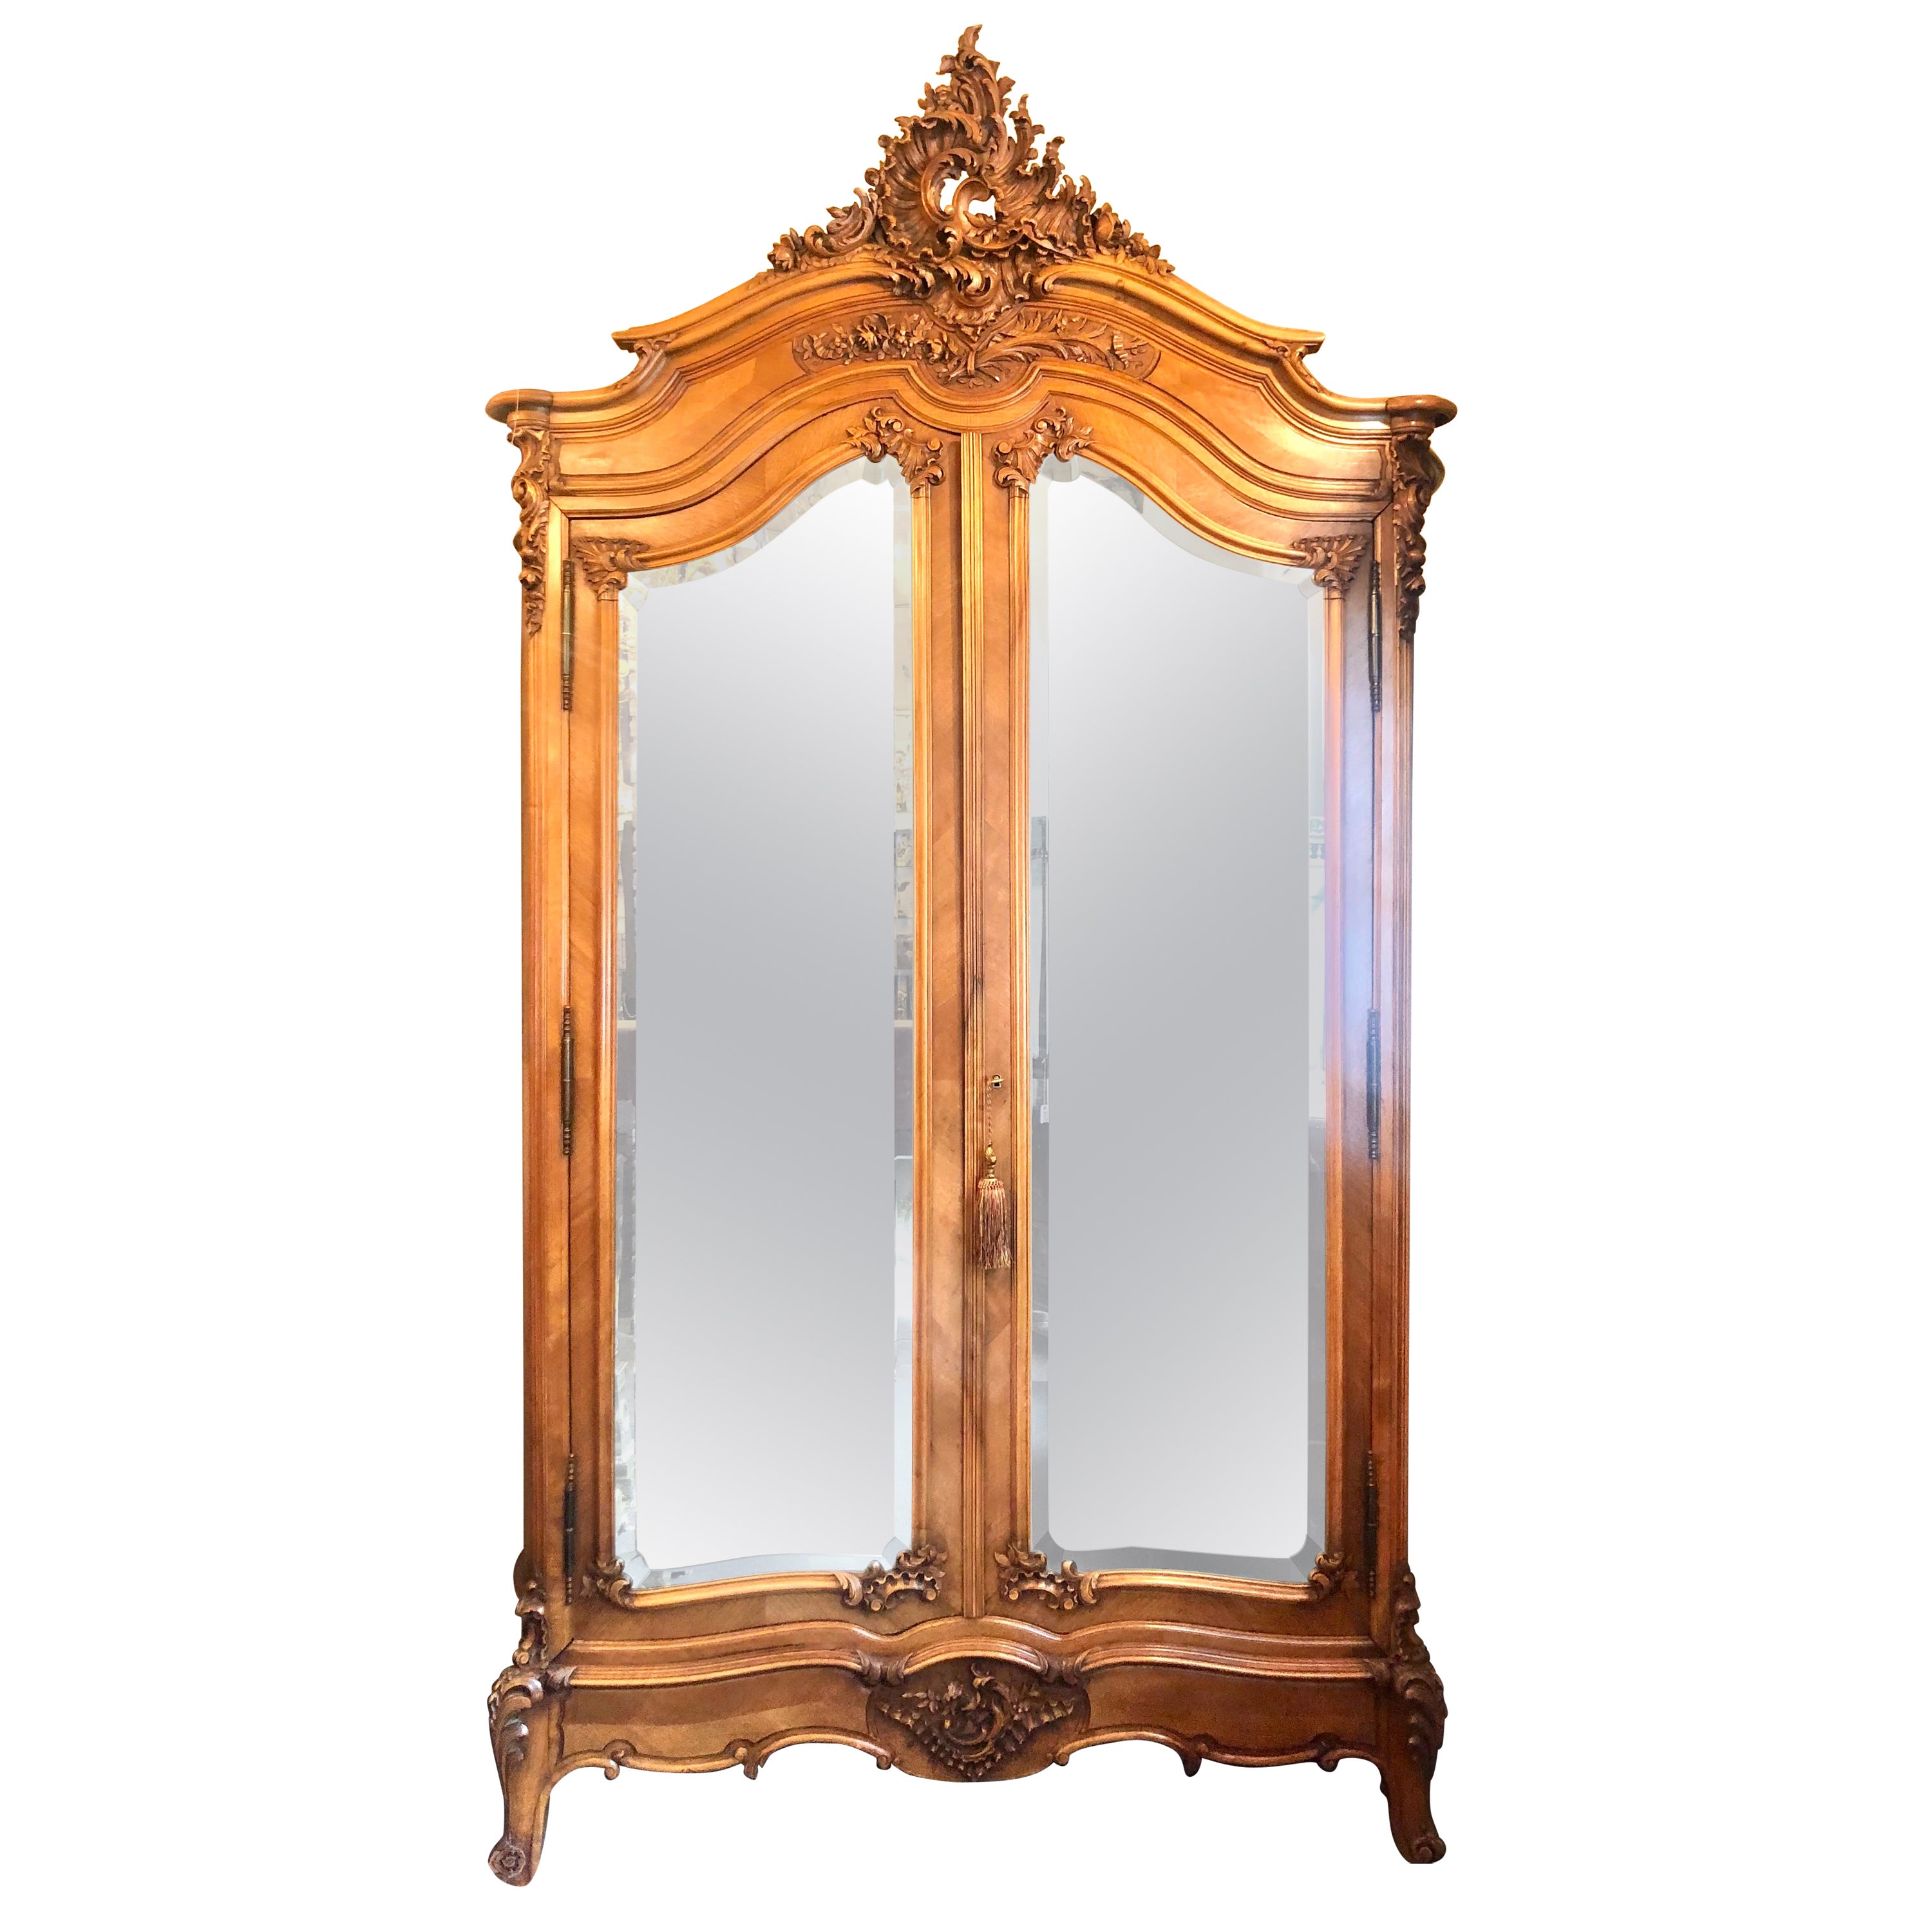 Antique French Louis XV Carved Walnut Beveled Mirror 2 Door Armoire, Circa 1880